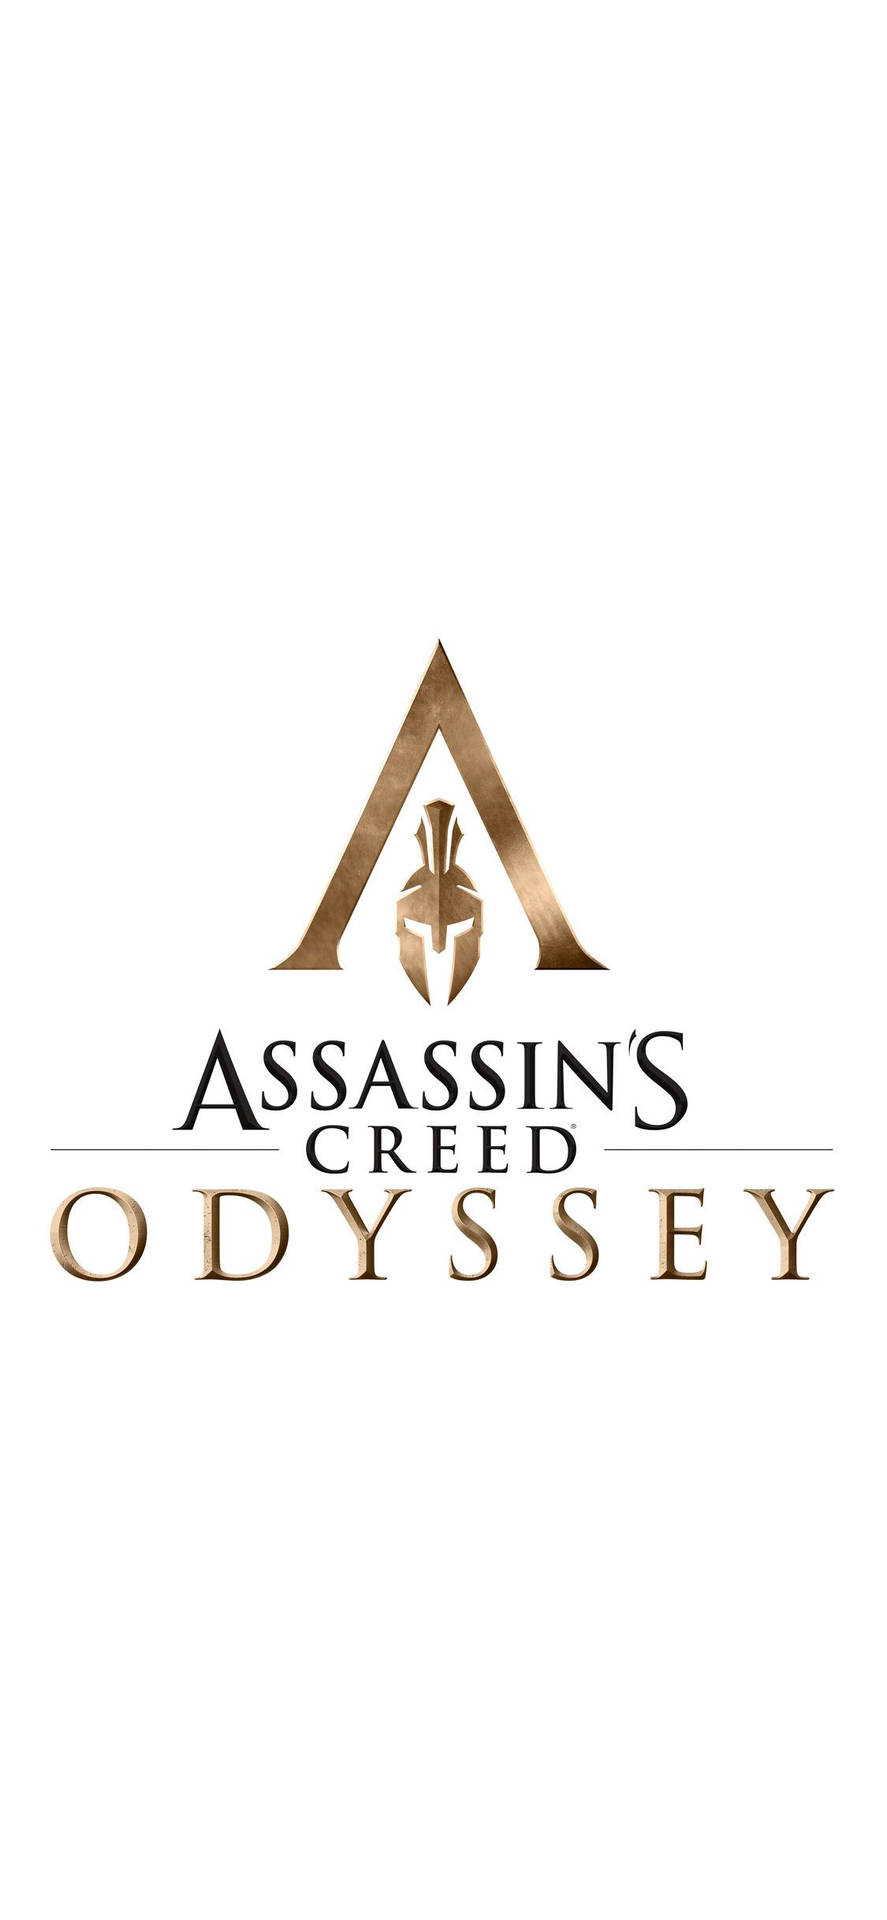 Game Logo Assassin's Creed Odyssey Iphone Wallpaper